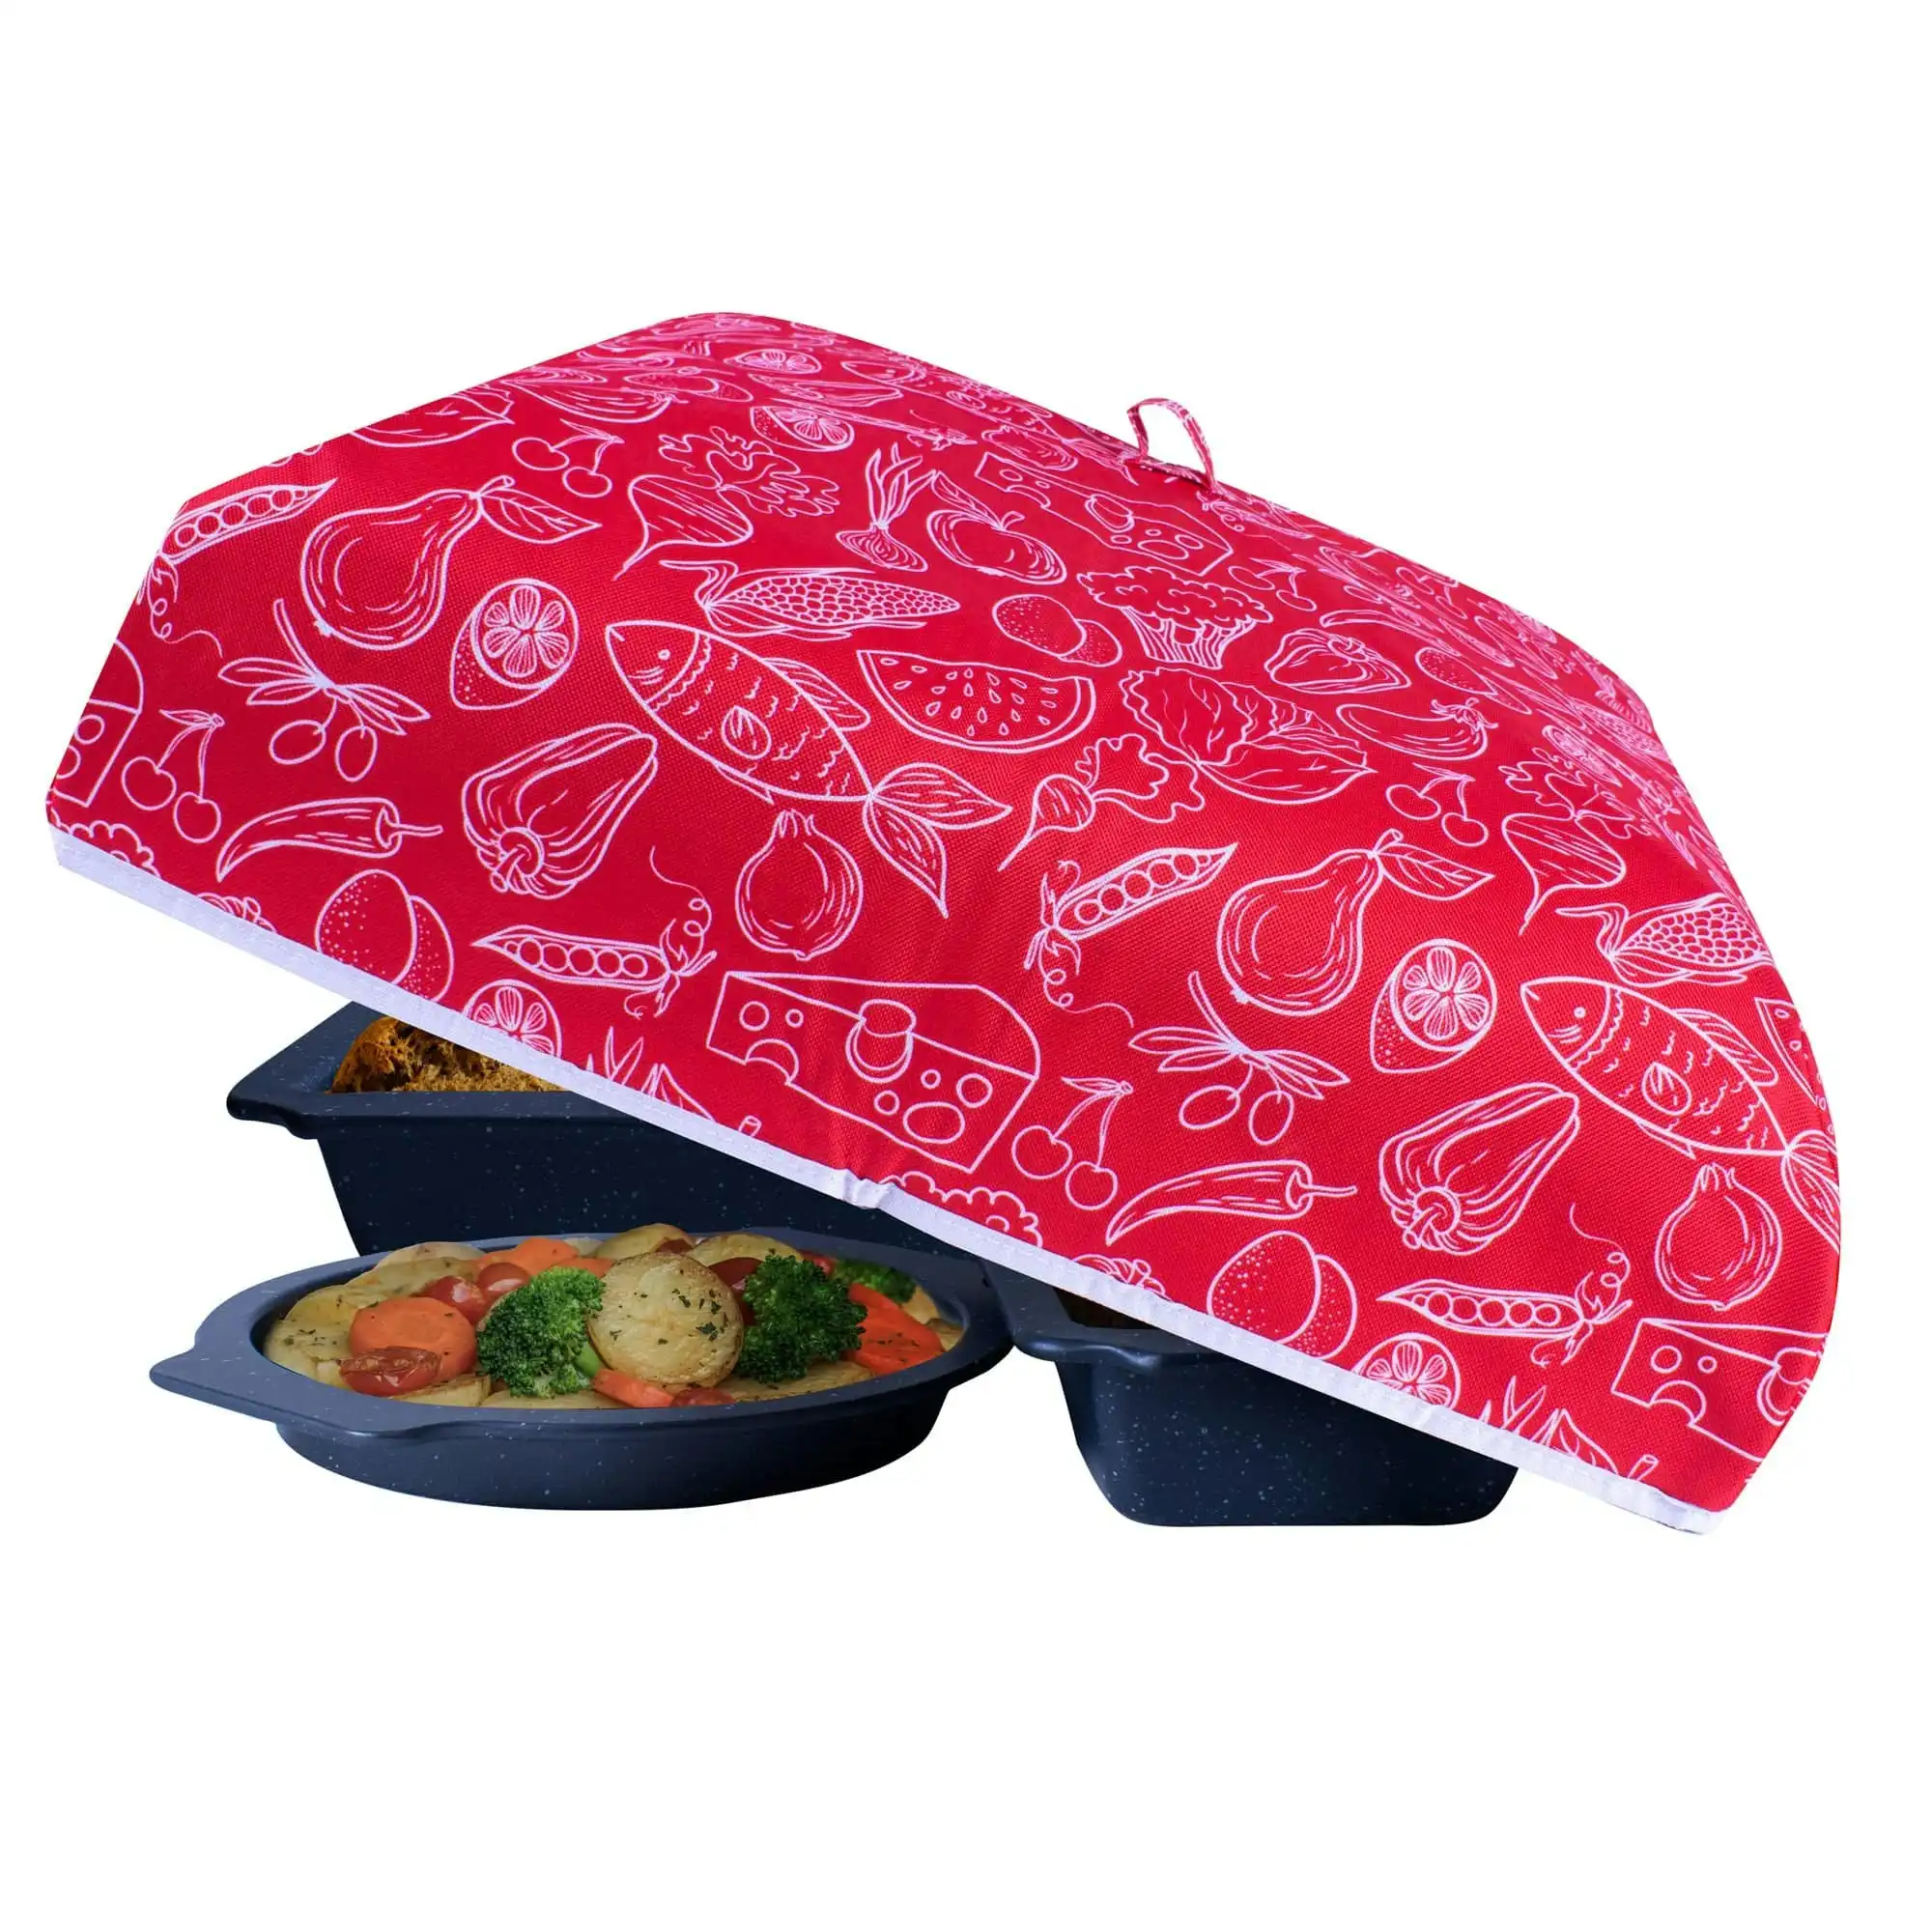 50cm Insulated Food Cover